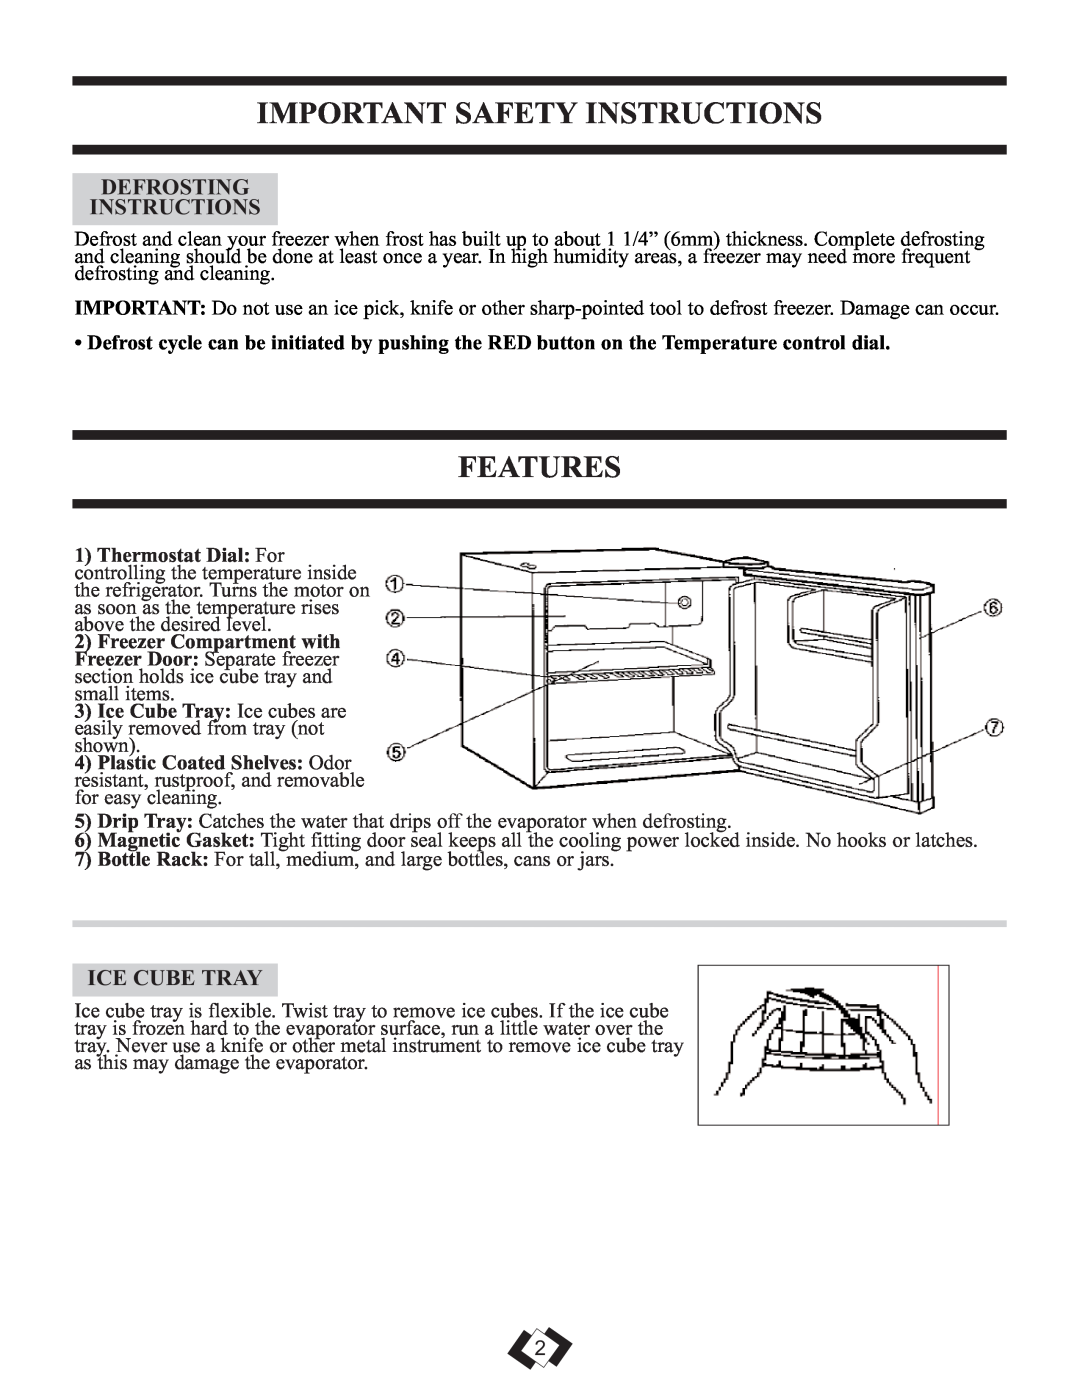 Danby DCR059BLE, DCR059WE warranty Features, Important Safety Instructions, Defrosting Instructions, Ice Cube Tray 